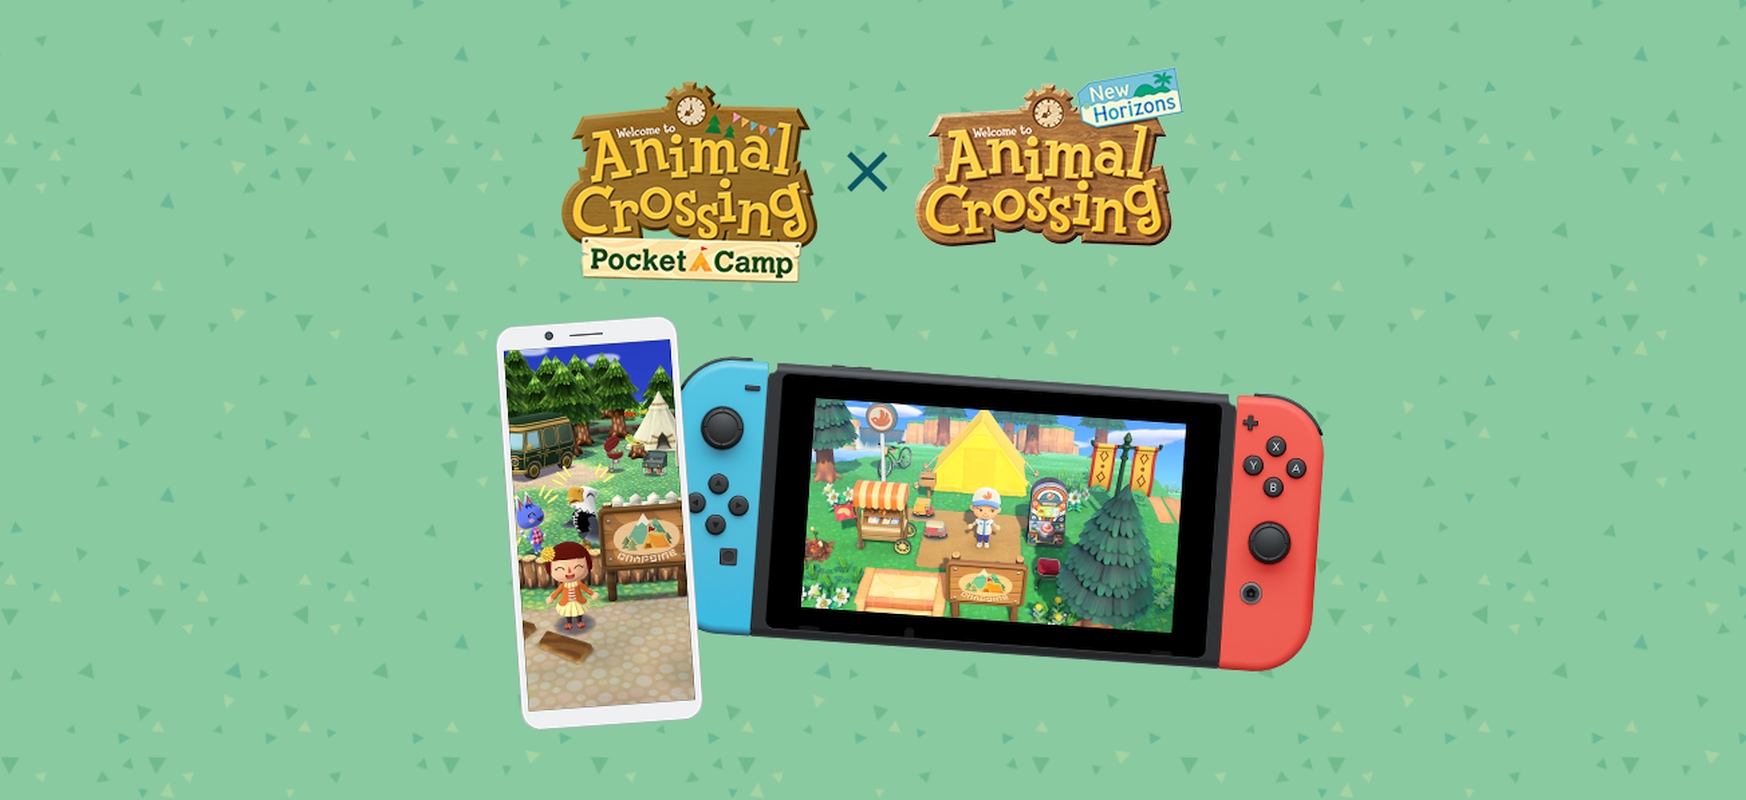 Animal Crossing: New Horizons Has Special Bonuses For Those Playing Pocket Camp Mobile Game